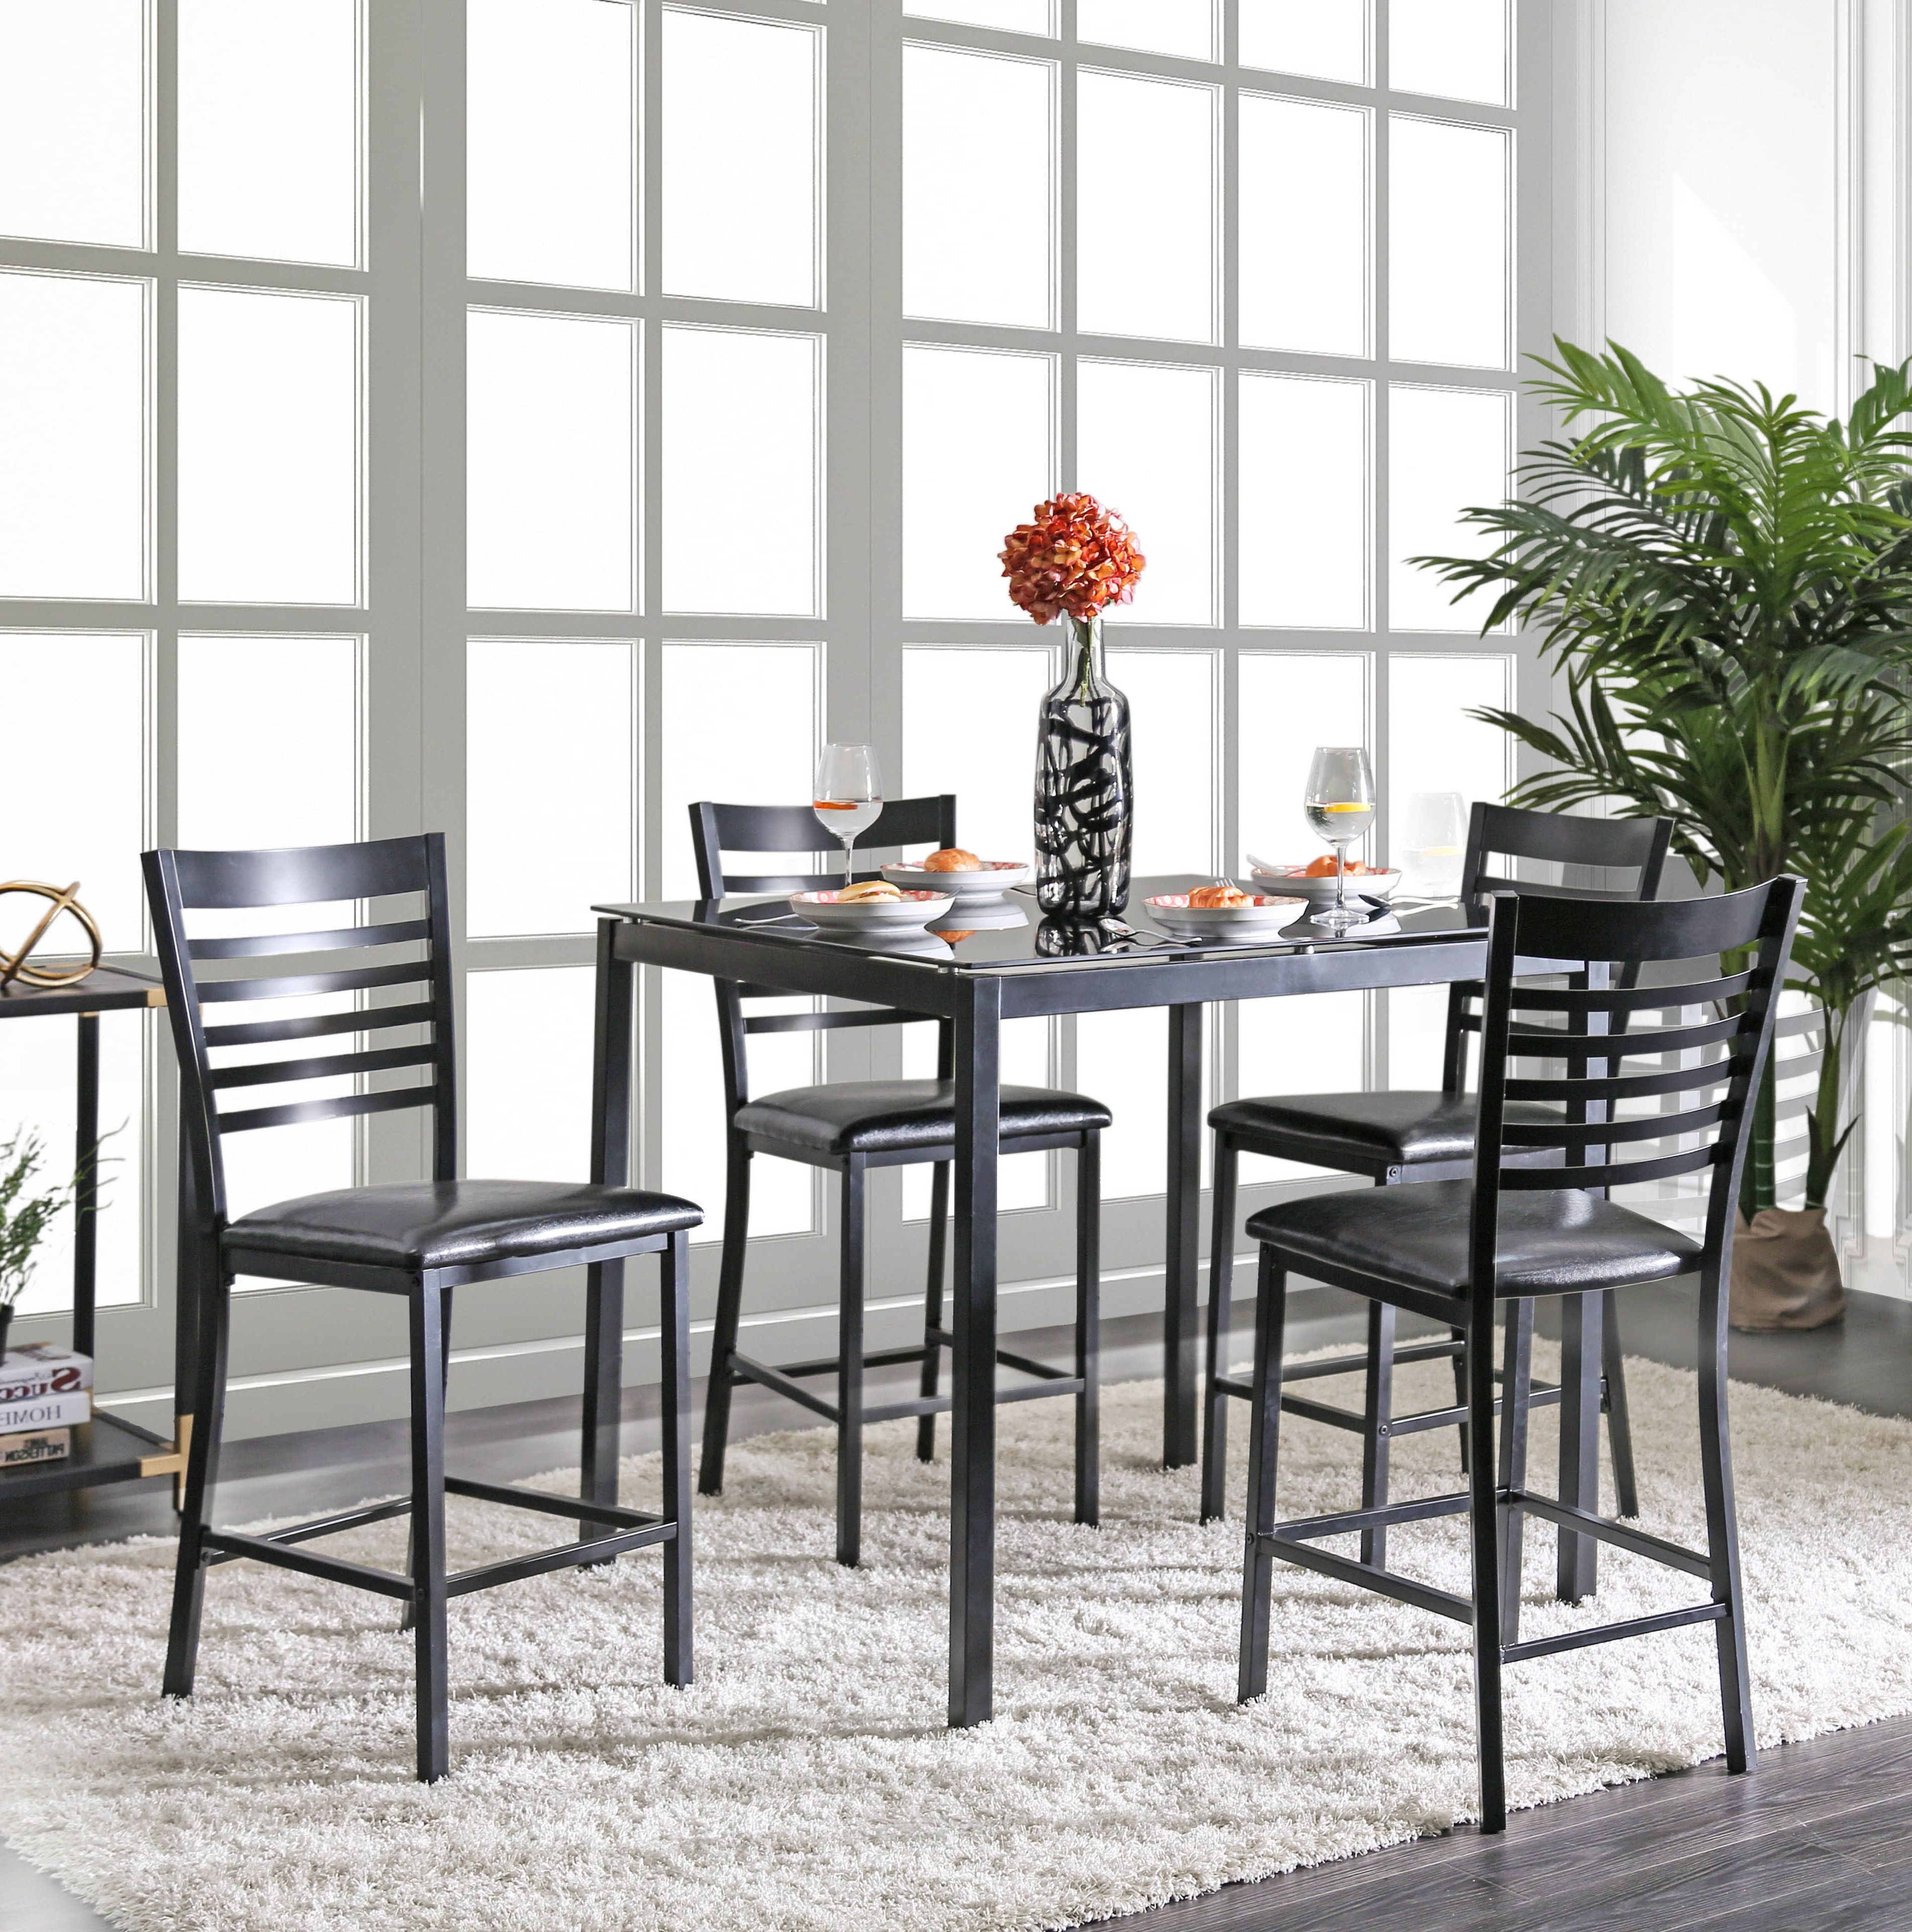 Most Recent Bhamidipati Pub 5 Piece Dining Set Within Lightle 5 Piece Breakfast Nook Dining Sets (View 8 of 20)